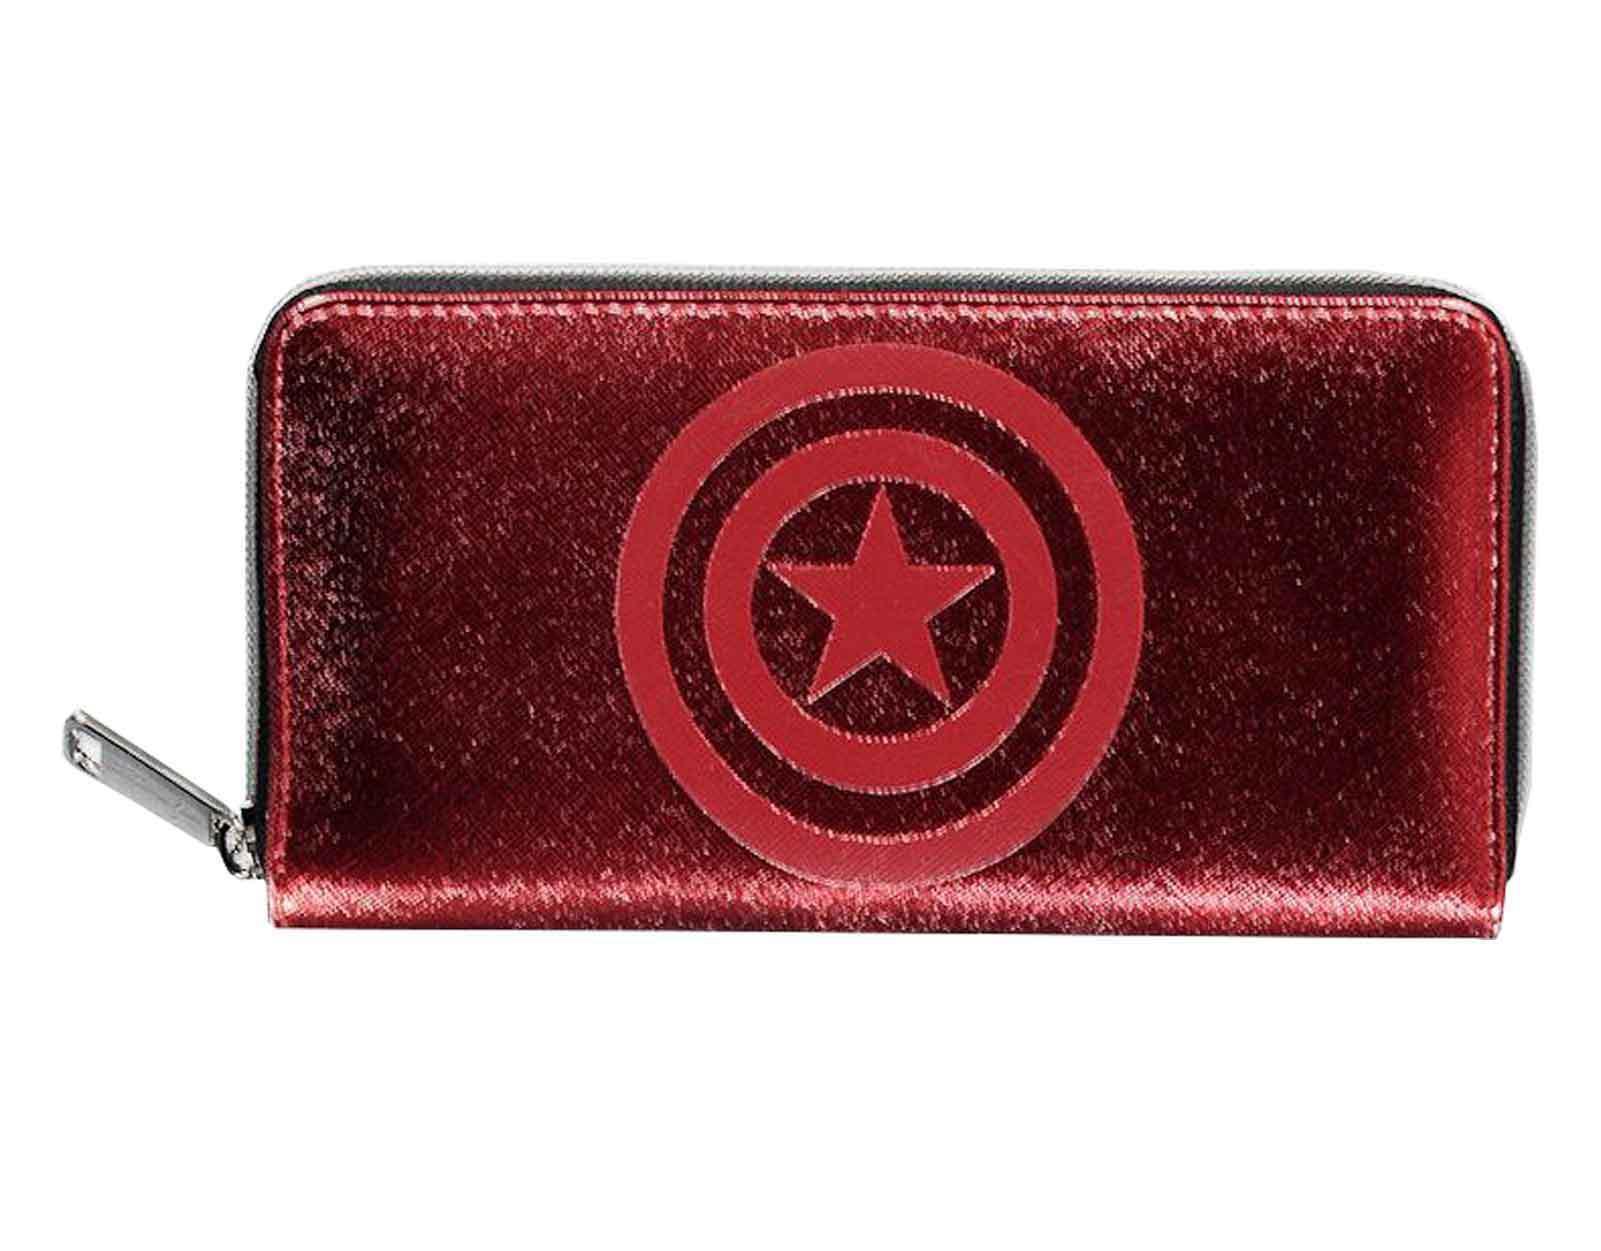 Captain armerica Purse Classic Shield Logo new Official Red Zip Around One Size